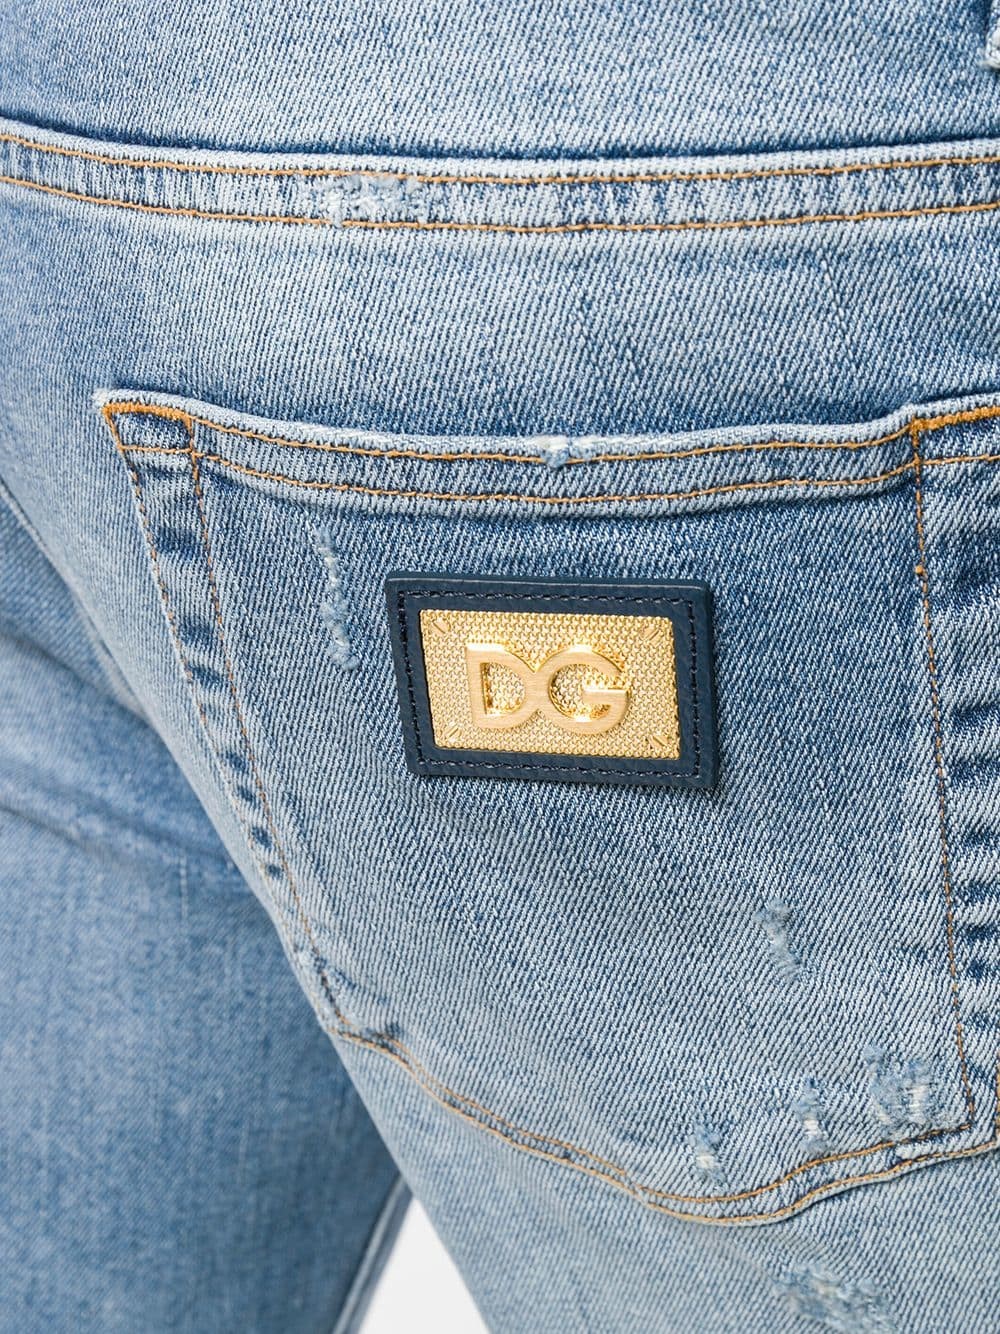 dolce & gabbana JEANS available on montiboutique.com - 26662